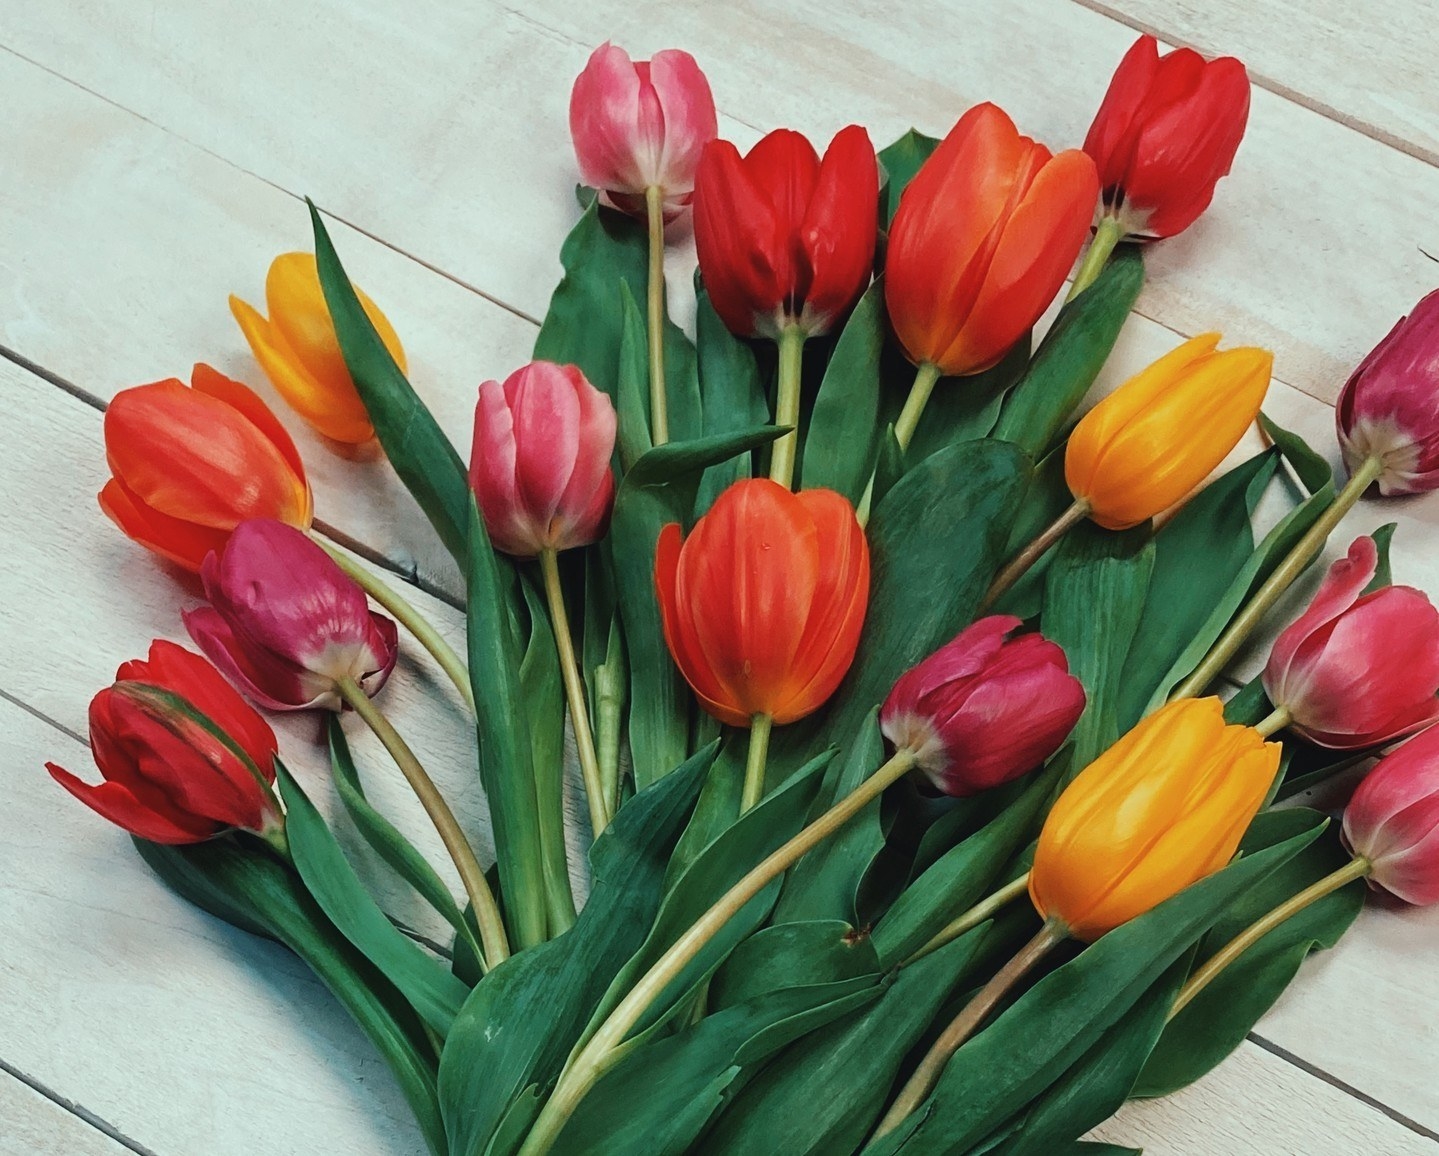 the pink, yellow, and orange tulips